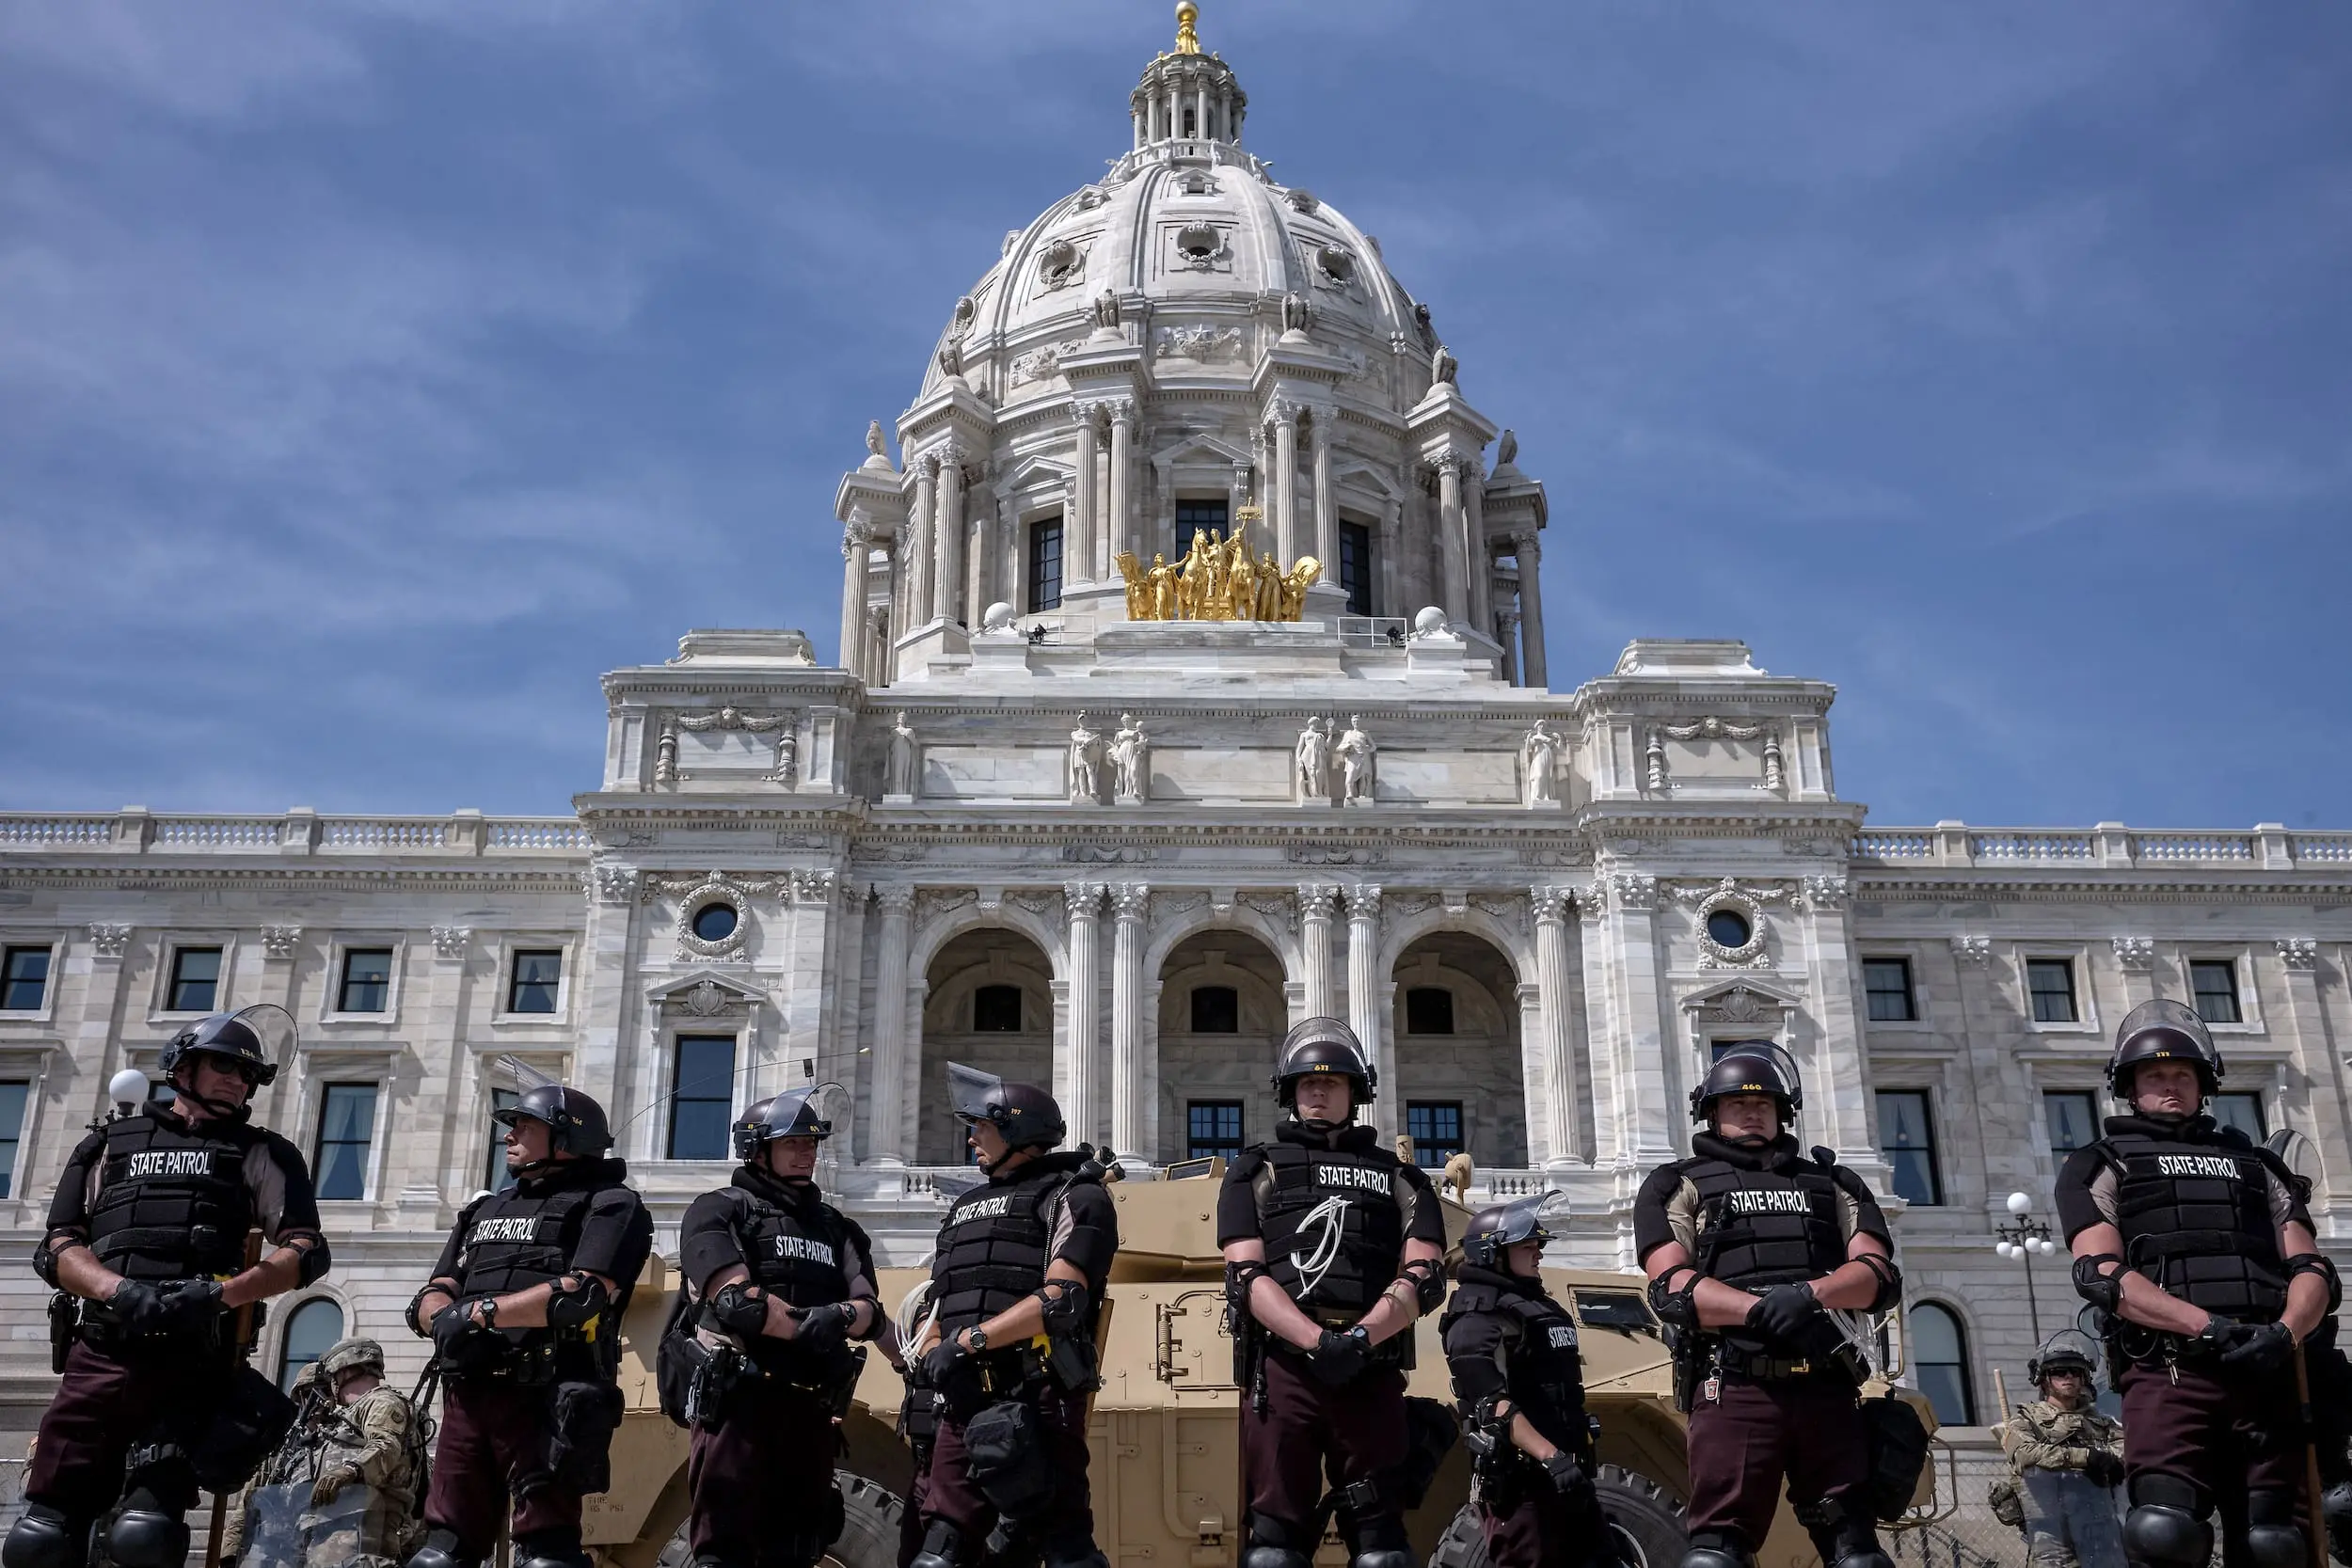 In the aftermath of the police killing of George Floyd, Minnesota State Police officers are backed by Minnesota National Guardmembers and armored personnel carriers in front of the state house on May 31, 2020.